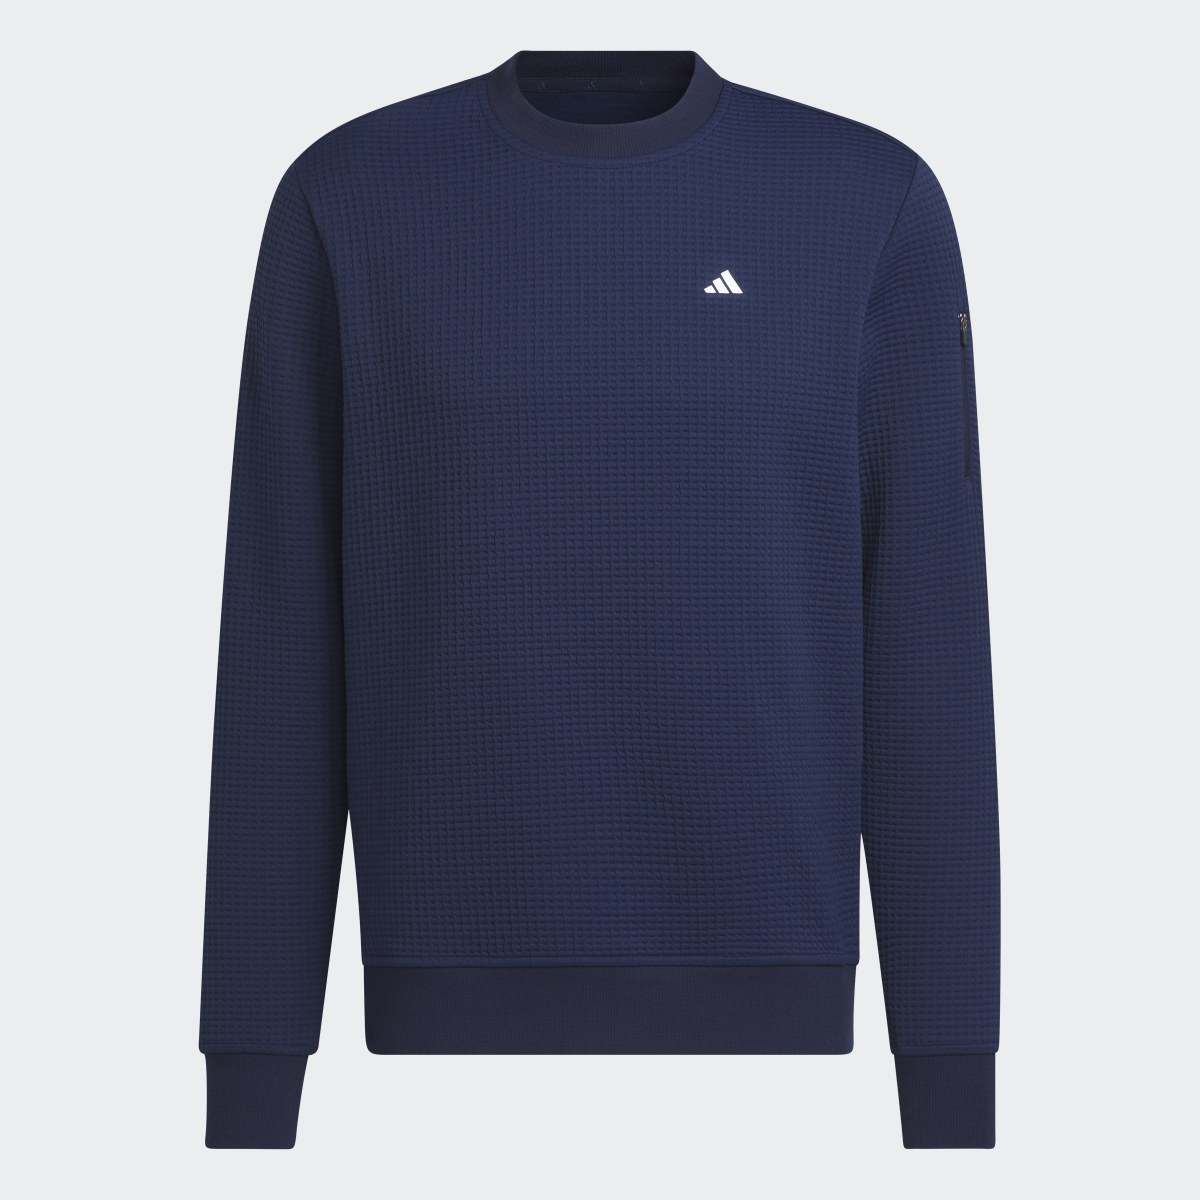 Adidas Ultimate365 Tour COLD.RDY Crewneck Pullover. 5